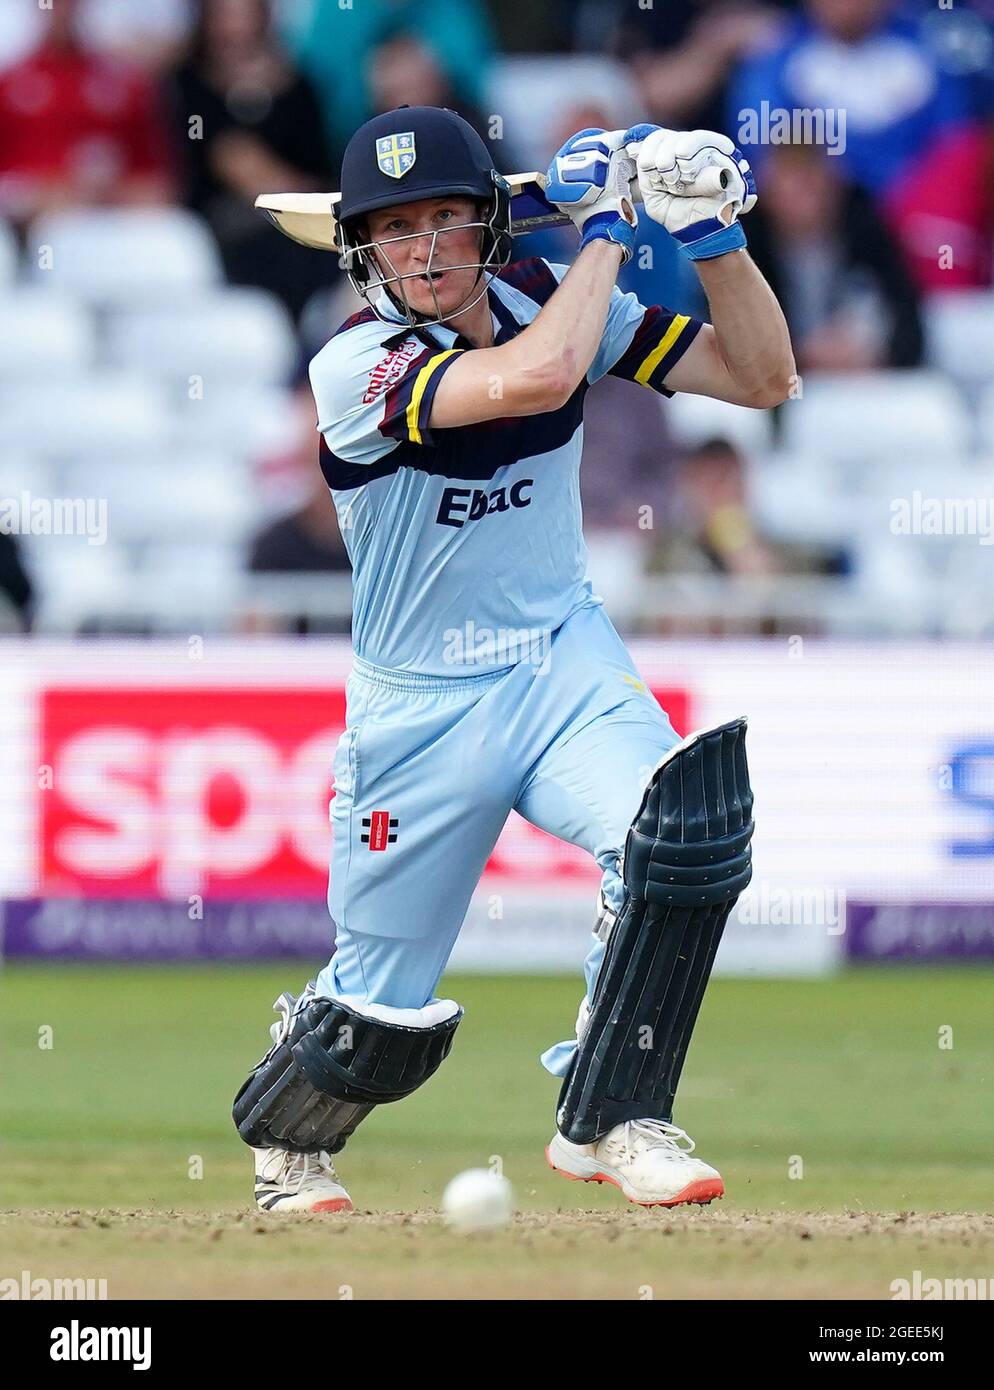 Durham's Cameron Bancroft batting during the Royal London One-Day Cup Final at Trent Bridge, Nottingham. Picture date: Thursday August 19, 2021. See PA story CRICKET Final. Photo credit should read: Zac Goodwin/PA Wire. RESTRICTIONS: No commercial use without prior written consent of the ECB. Still image use only. No moving images to emulate broadcast. Editorial use only. No removing or obscuring of sponsor logos. Stock Photo